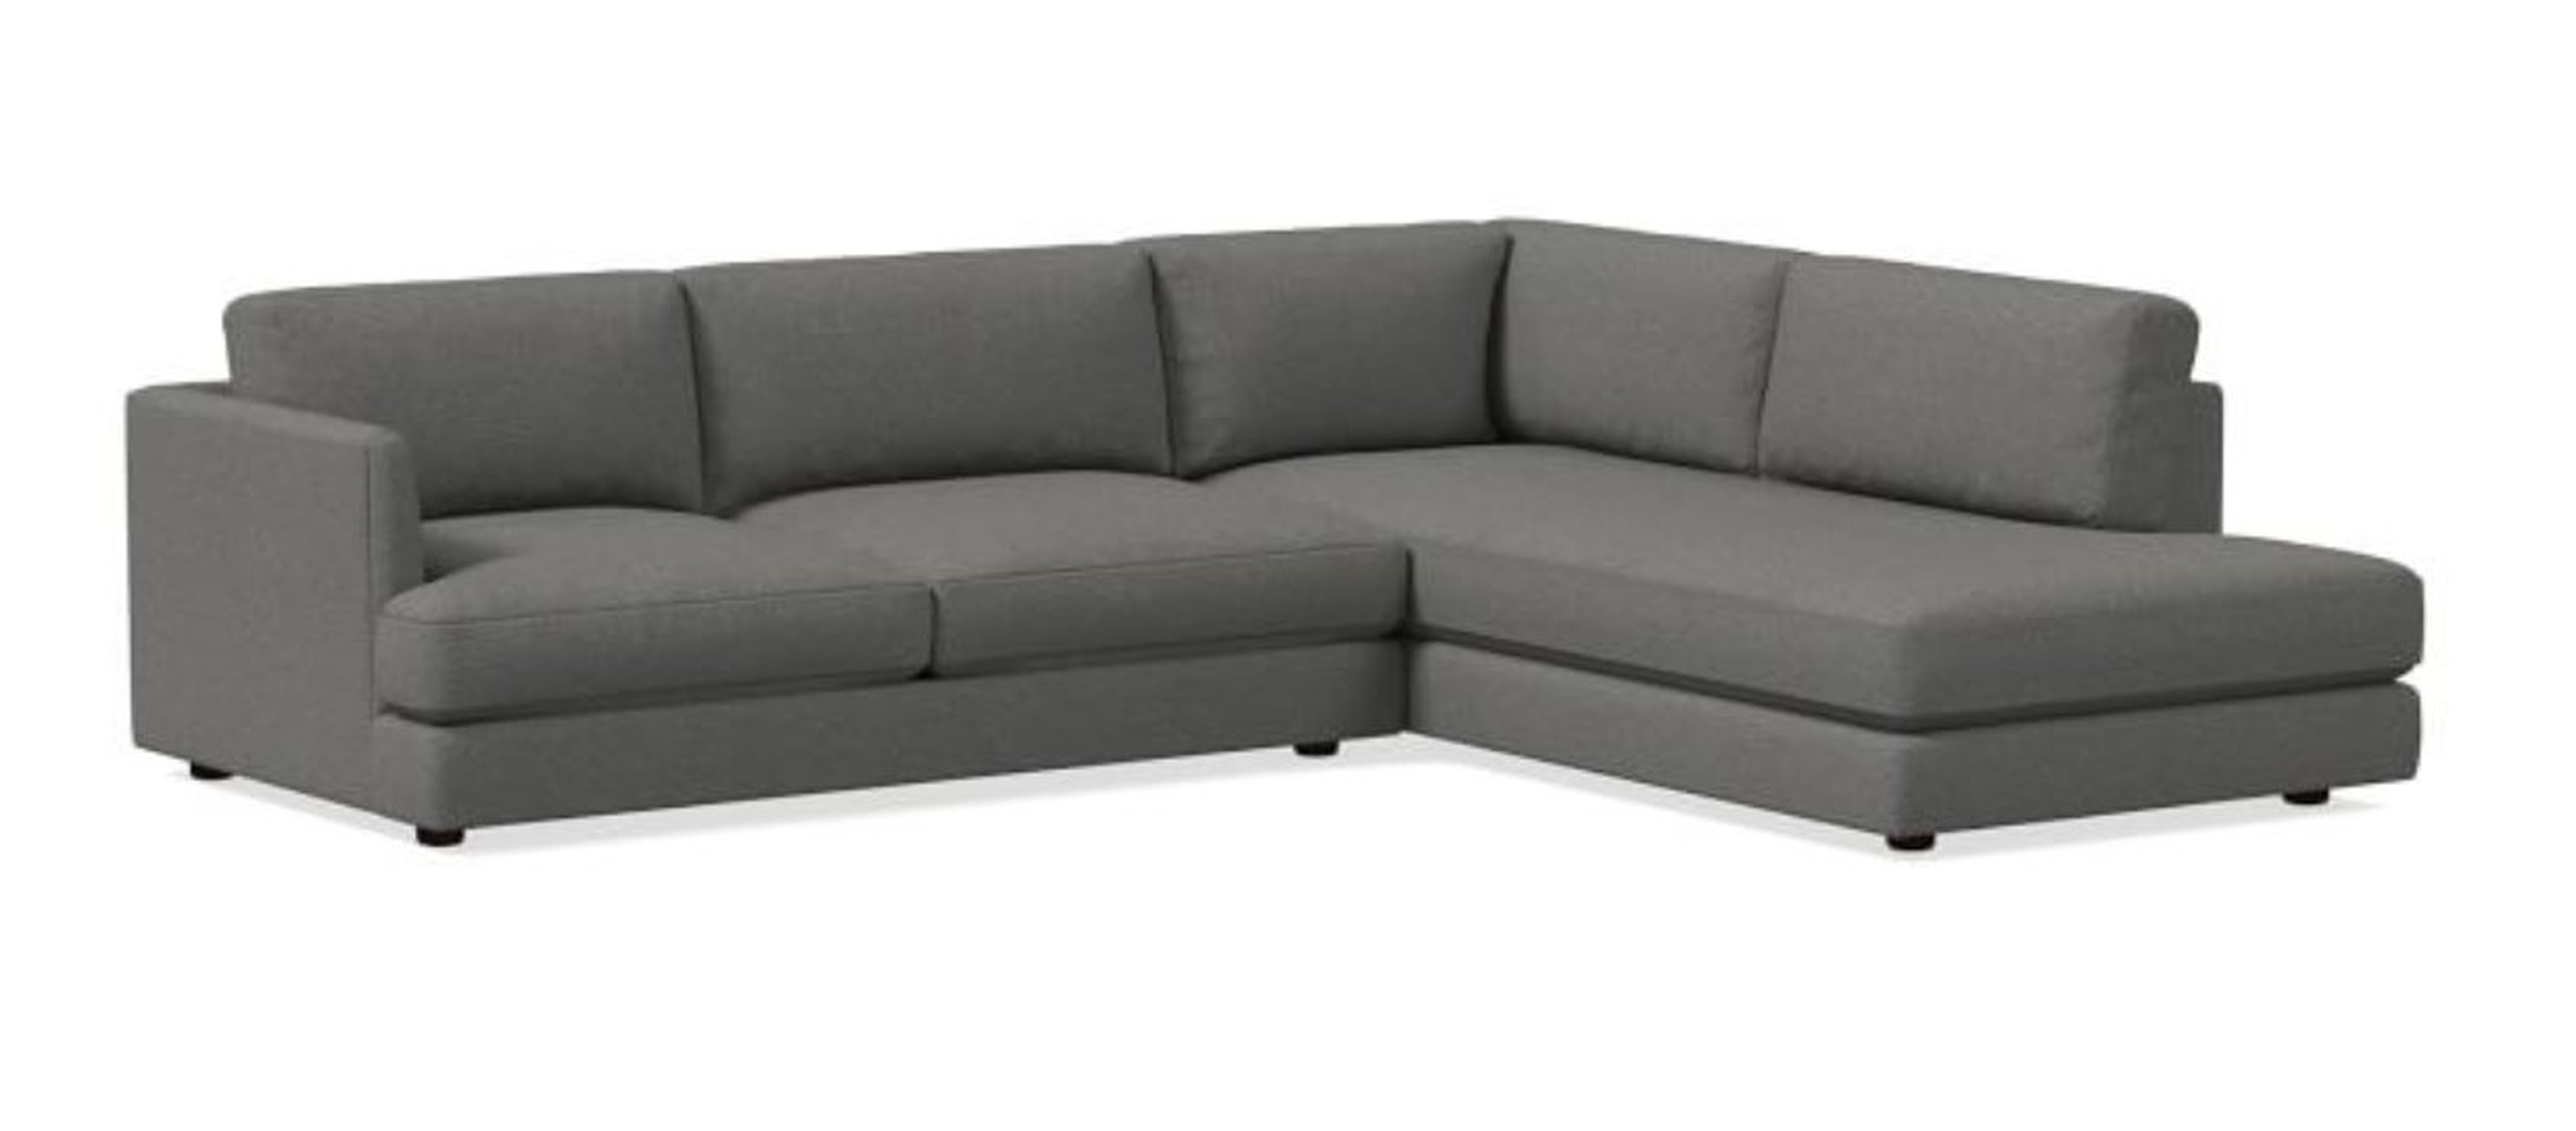 Haven 2-Piece Terminal Chaise Sectional, Right Arm Sofa, Right Arm Chaise - West Elm